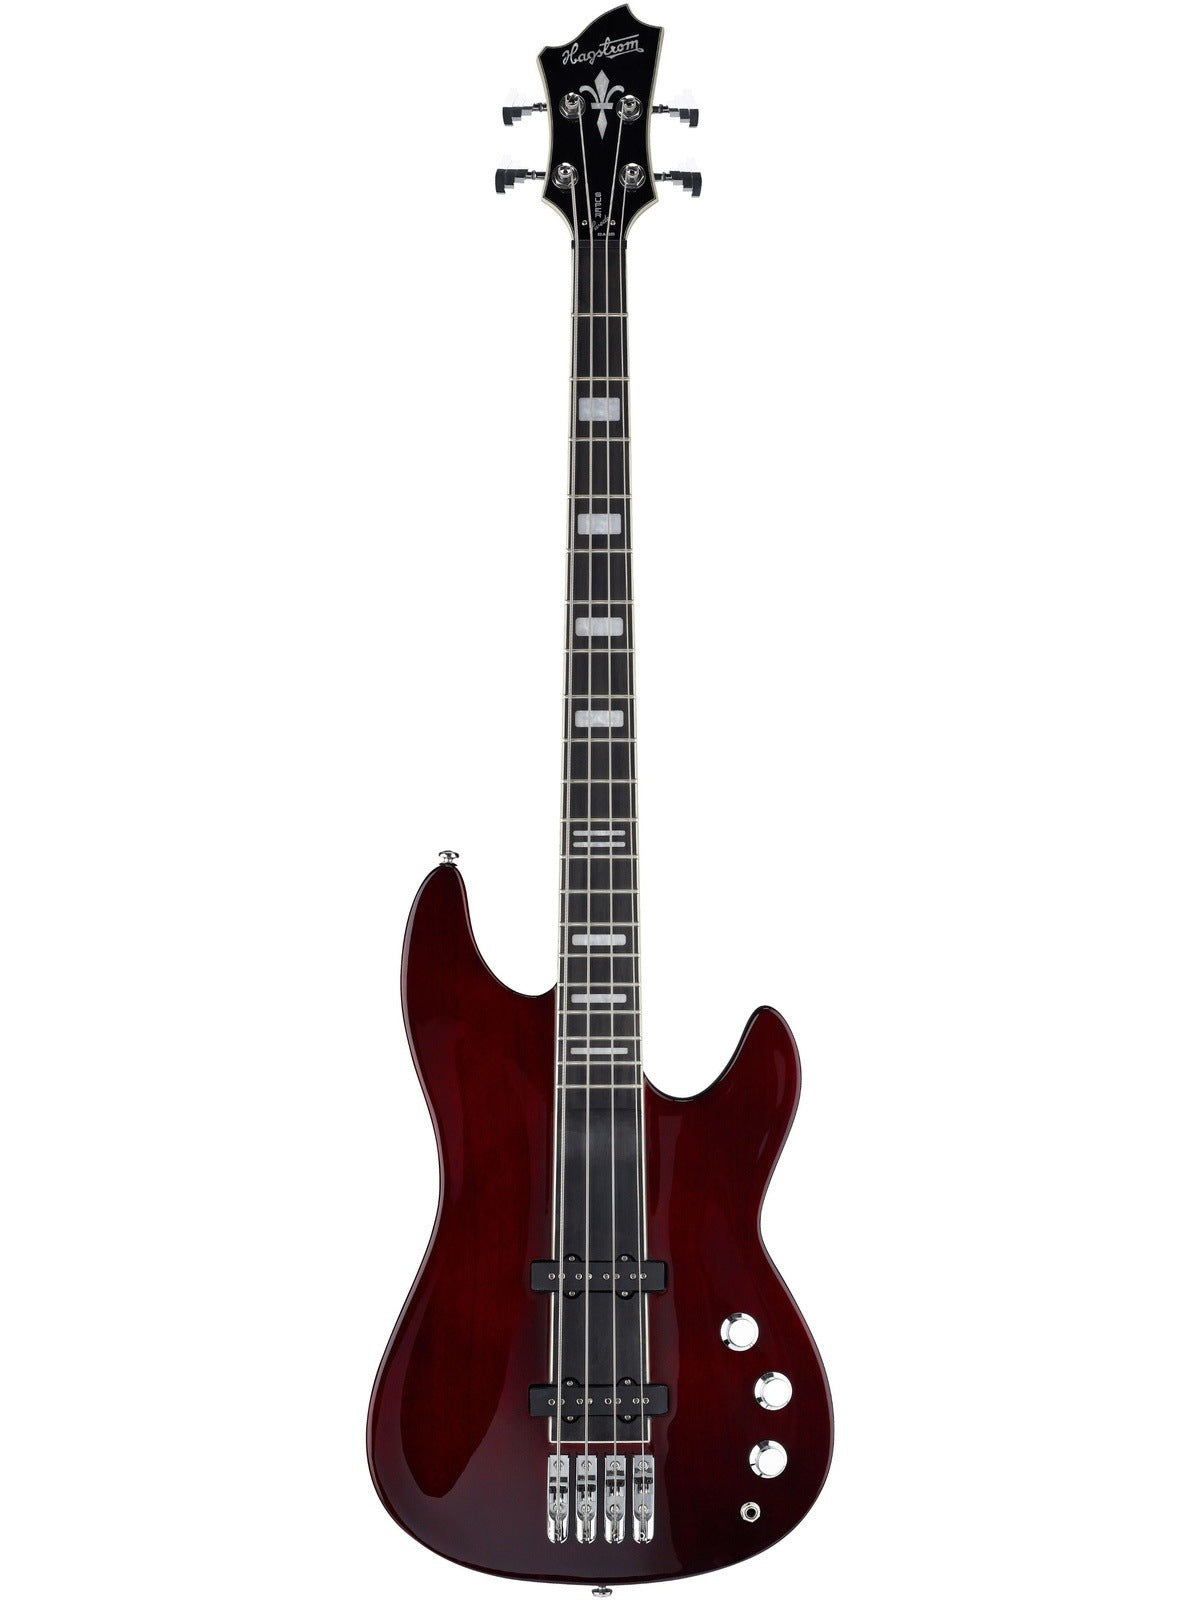 Hagstrom Super Swede 4-String Electric Bass